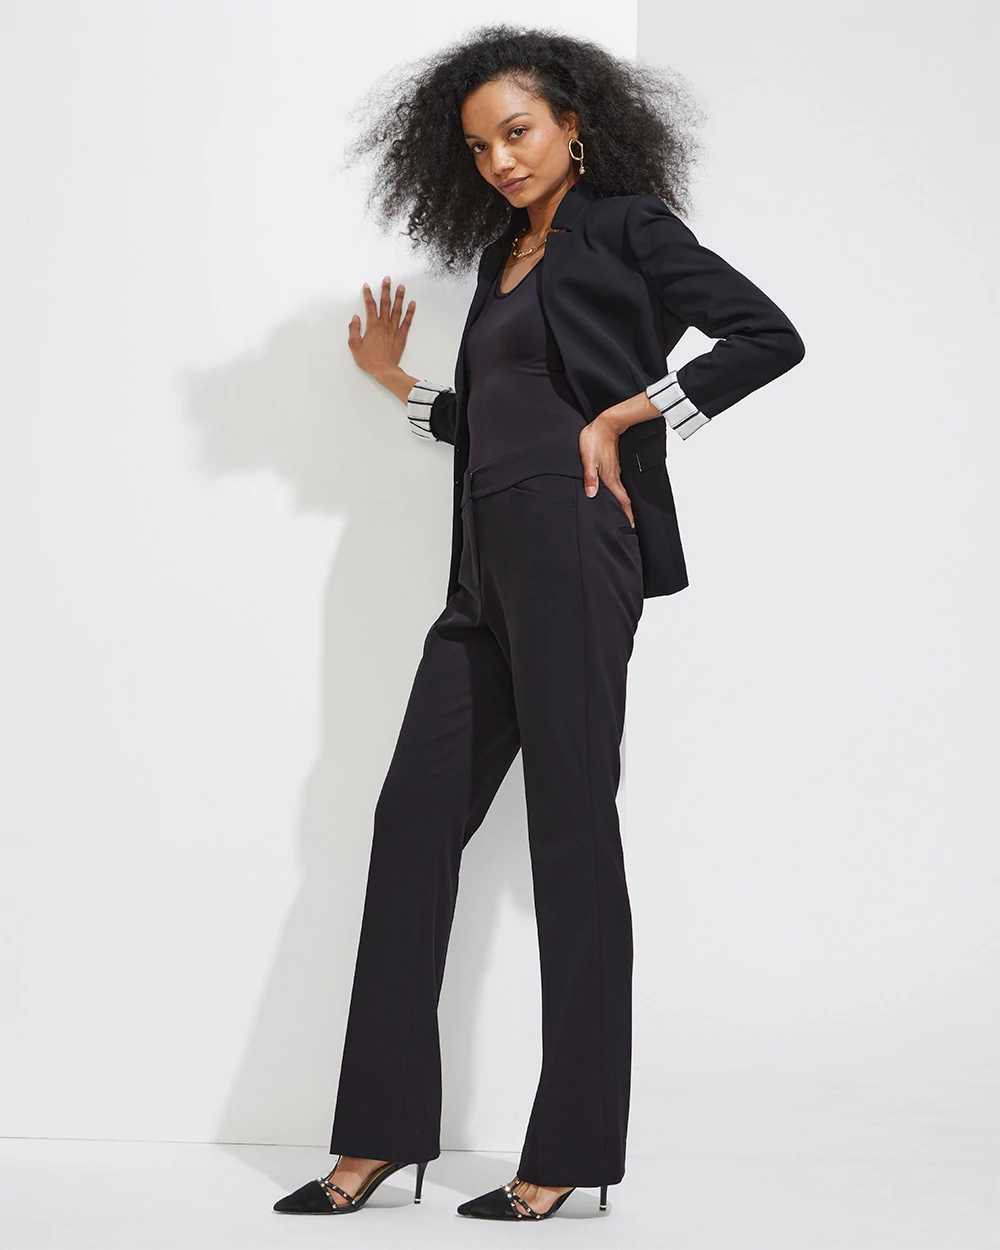 Outlet WHBM Seasonless Slim Bootcut Pants click to view larger image.